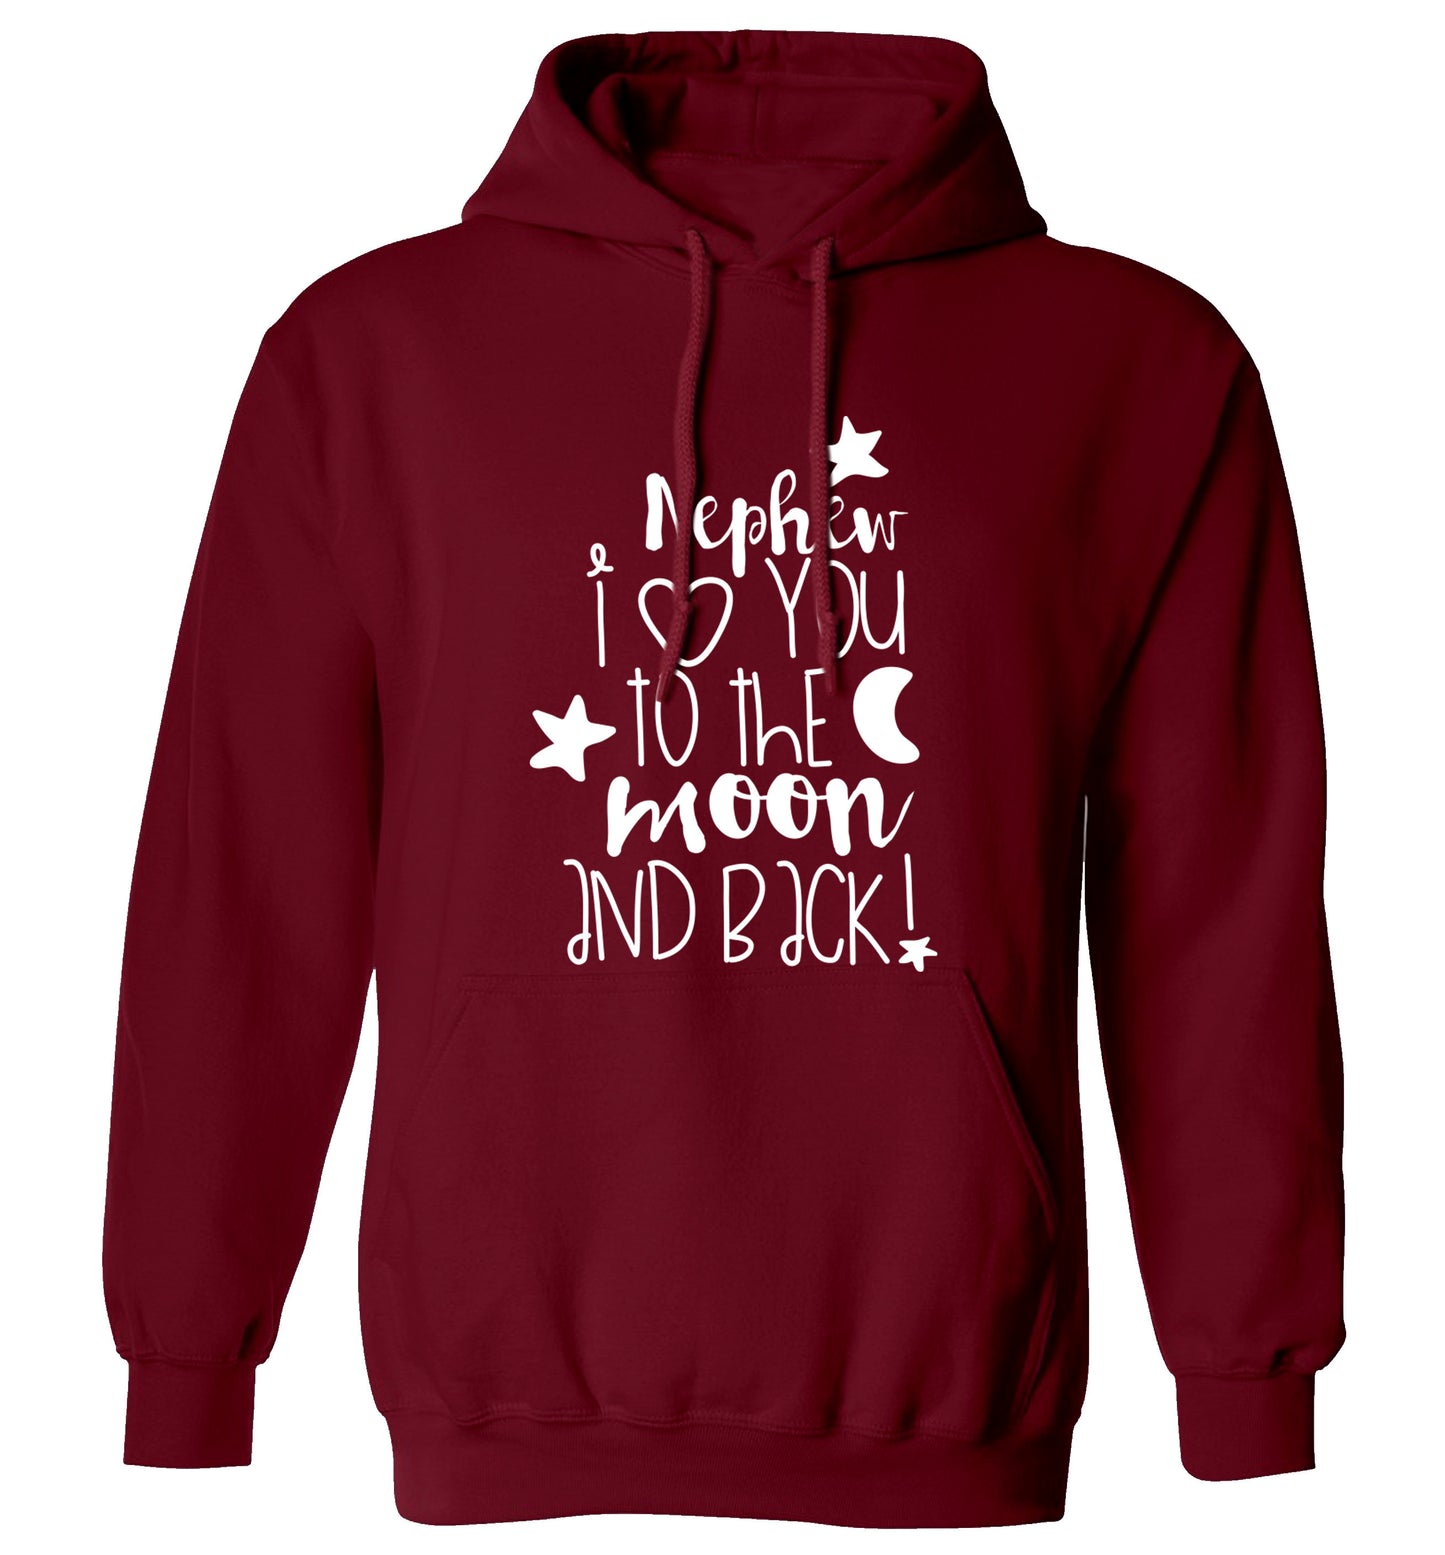 Nephew I love you to the moon and back adults unisex maroon hoodie 2XL